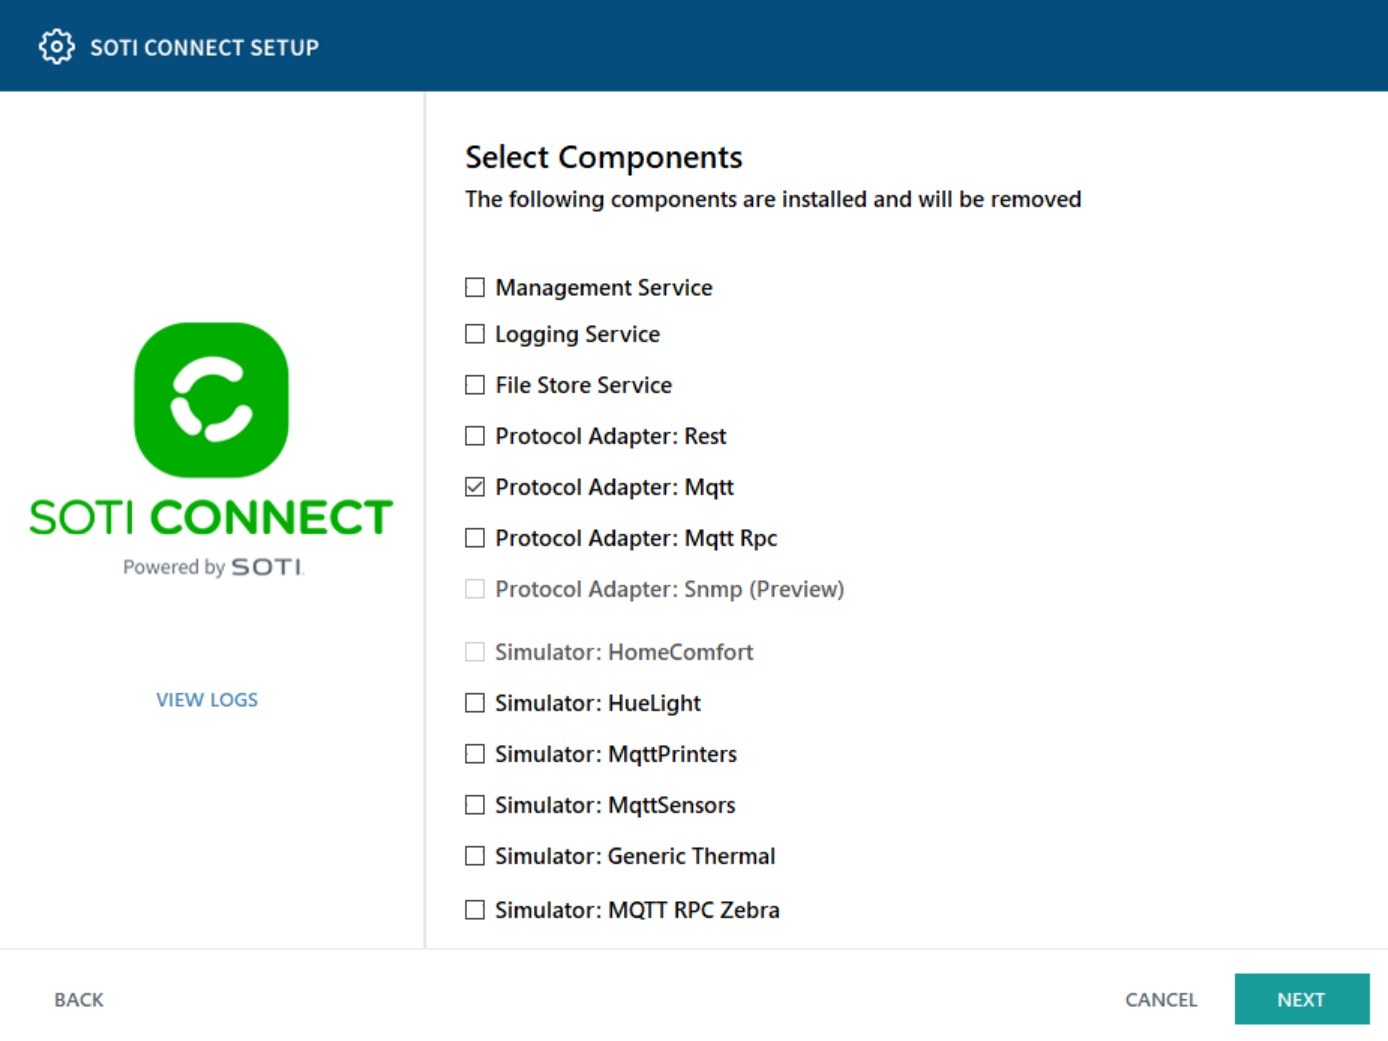 SOTI Connect Setup Wizard components to install